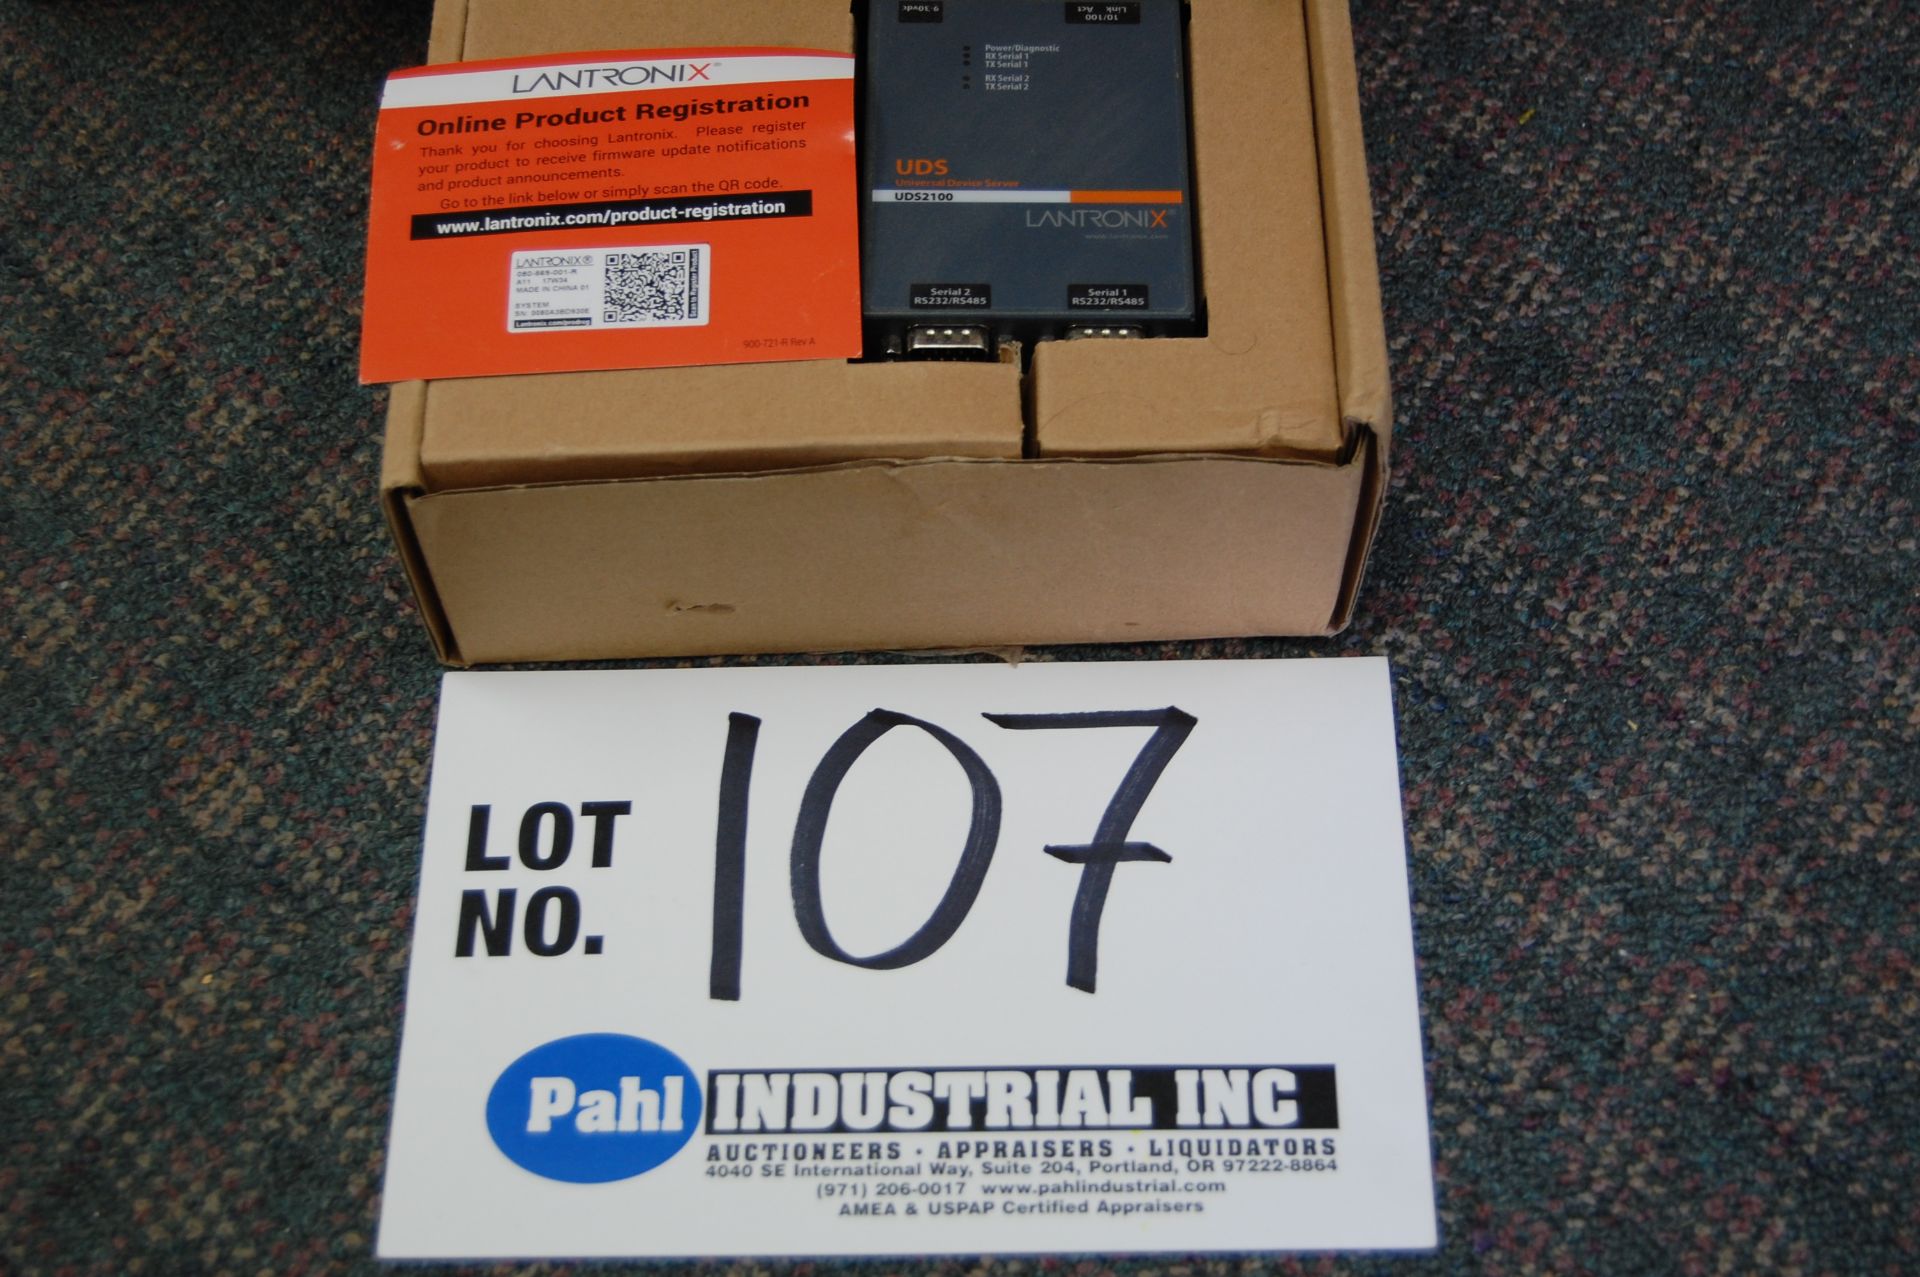 Lantronix UDS2100 Universal Device Server New In Box